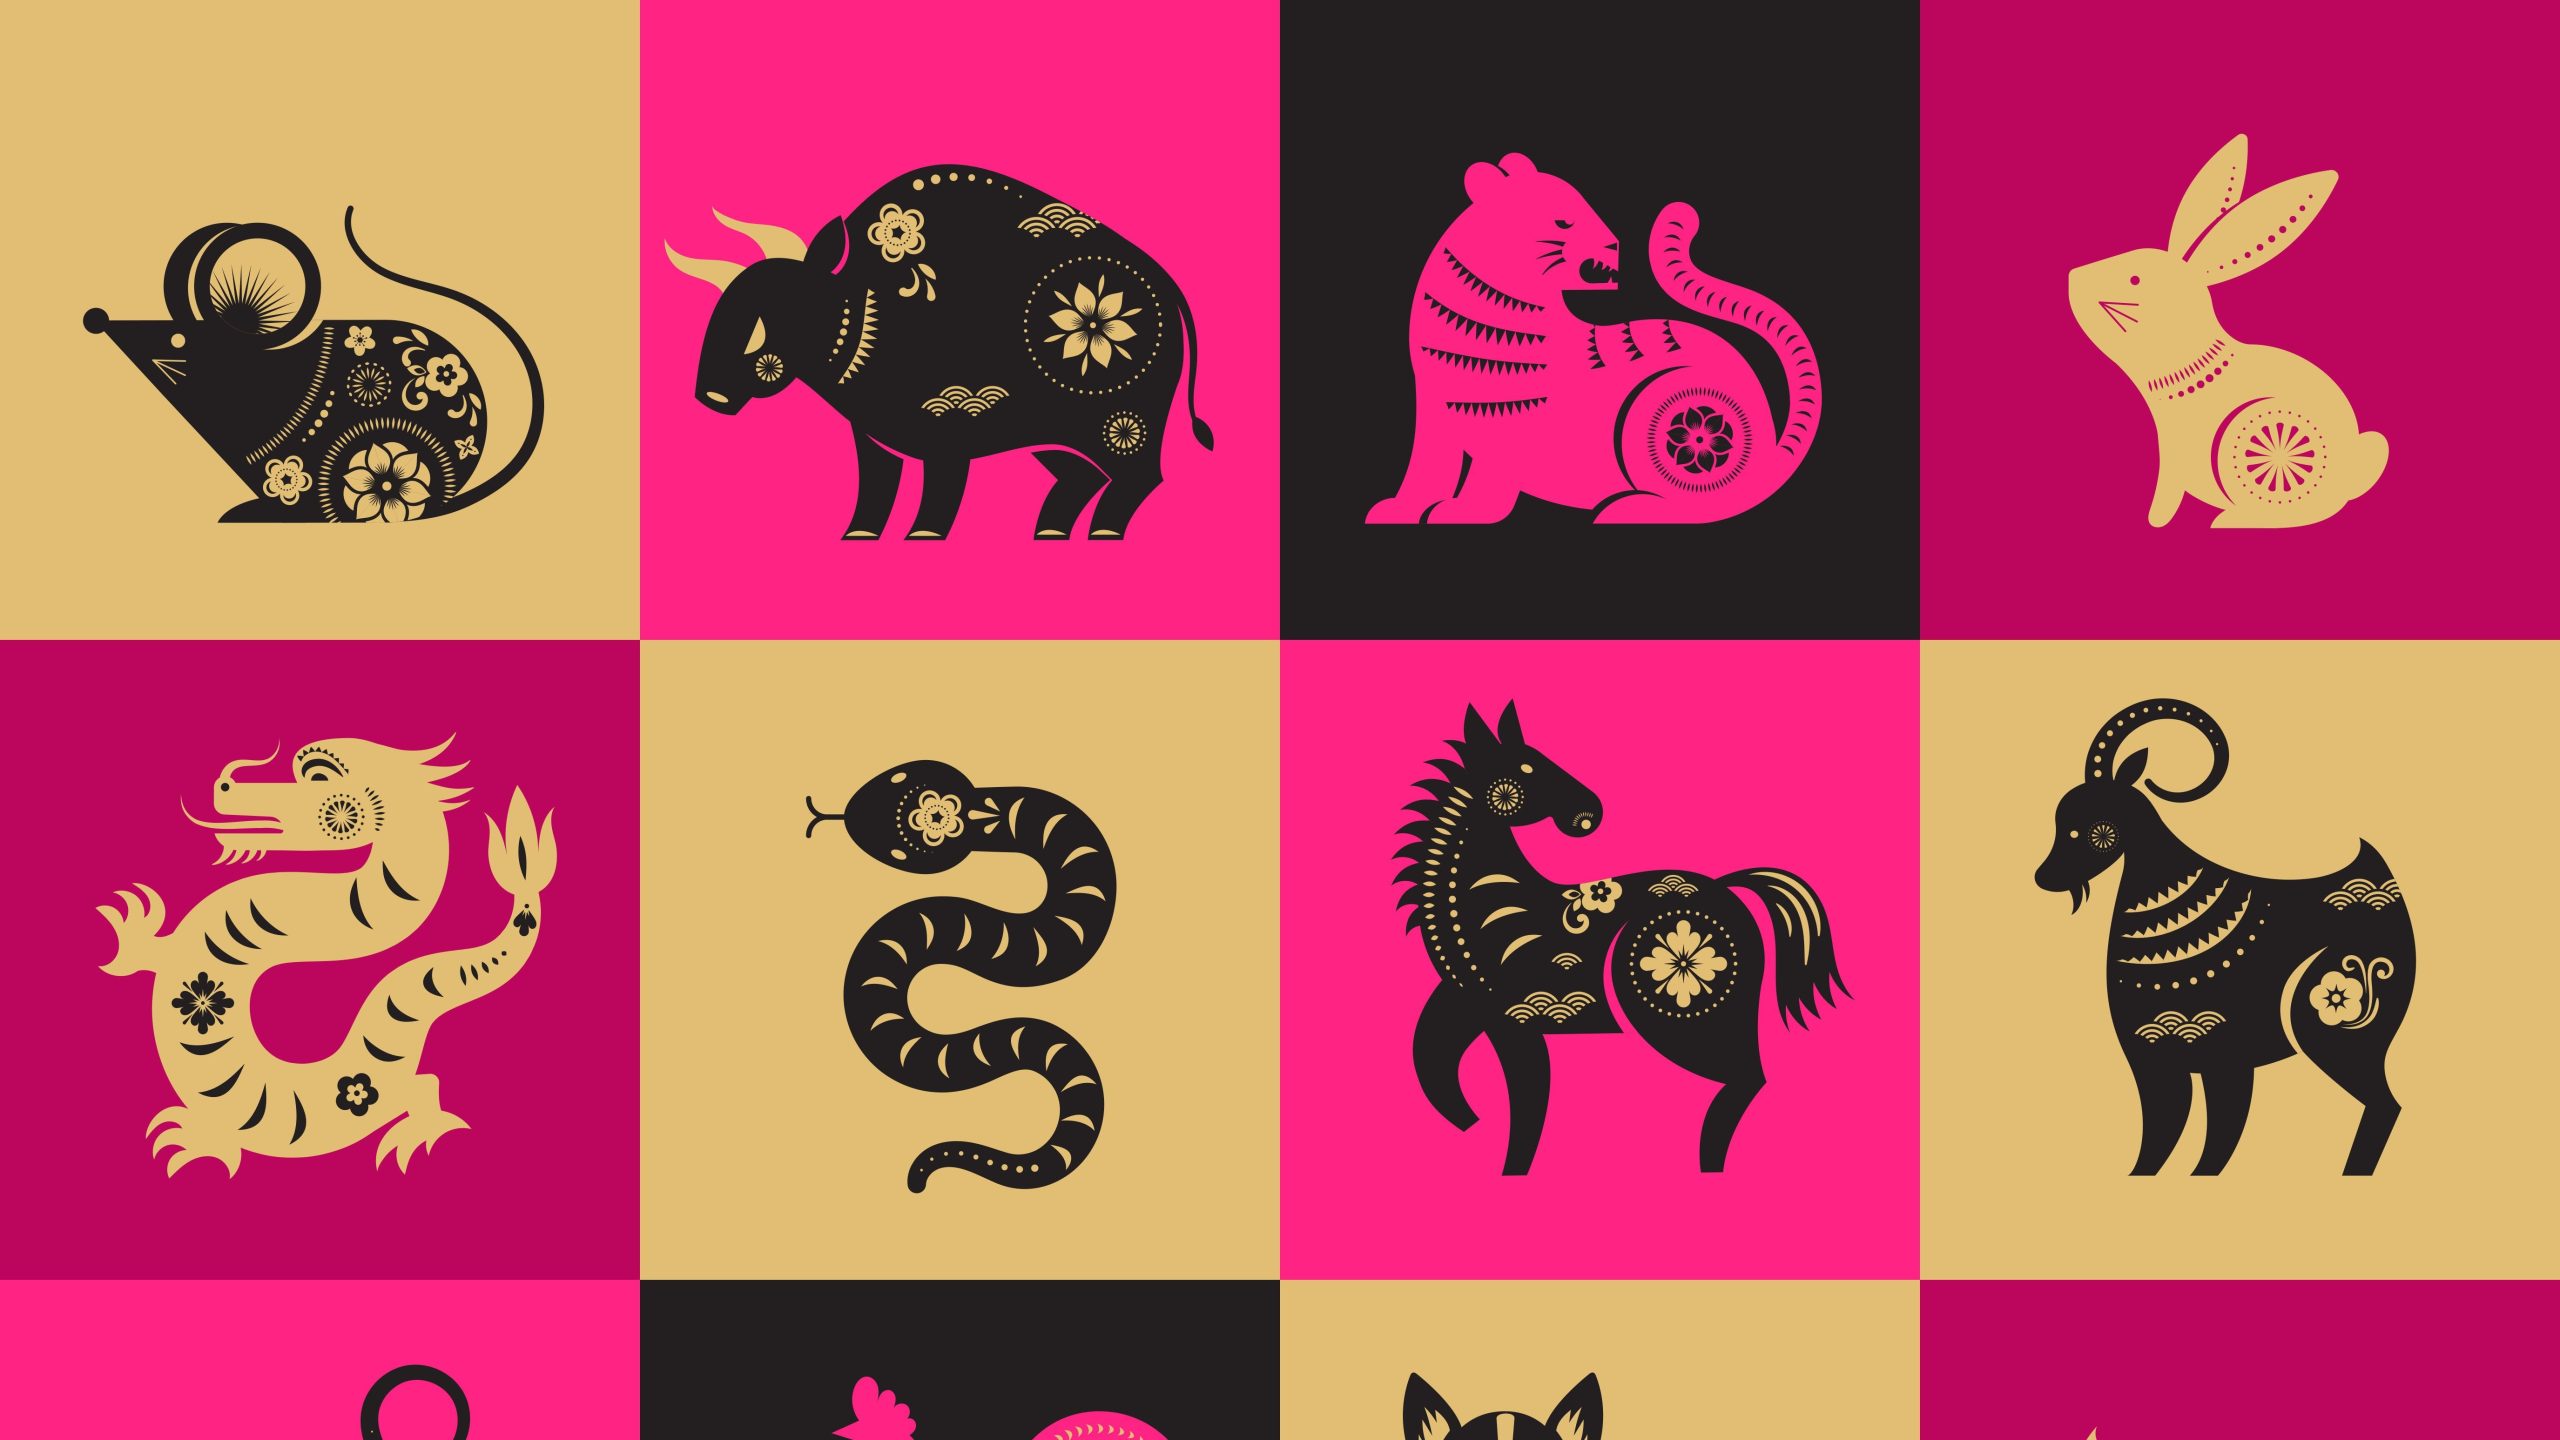 Chinese zodiac signs explained